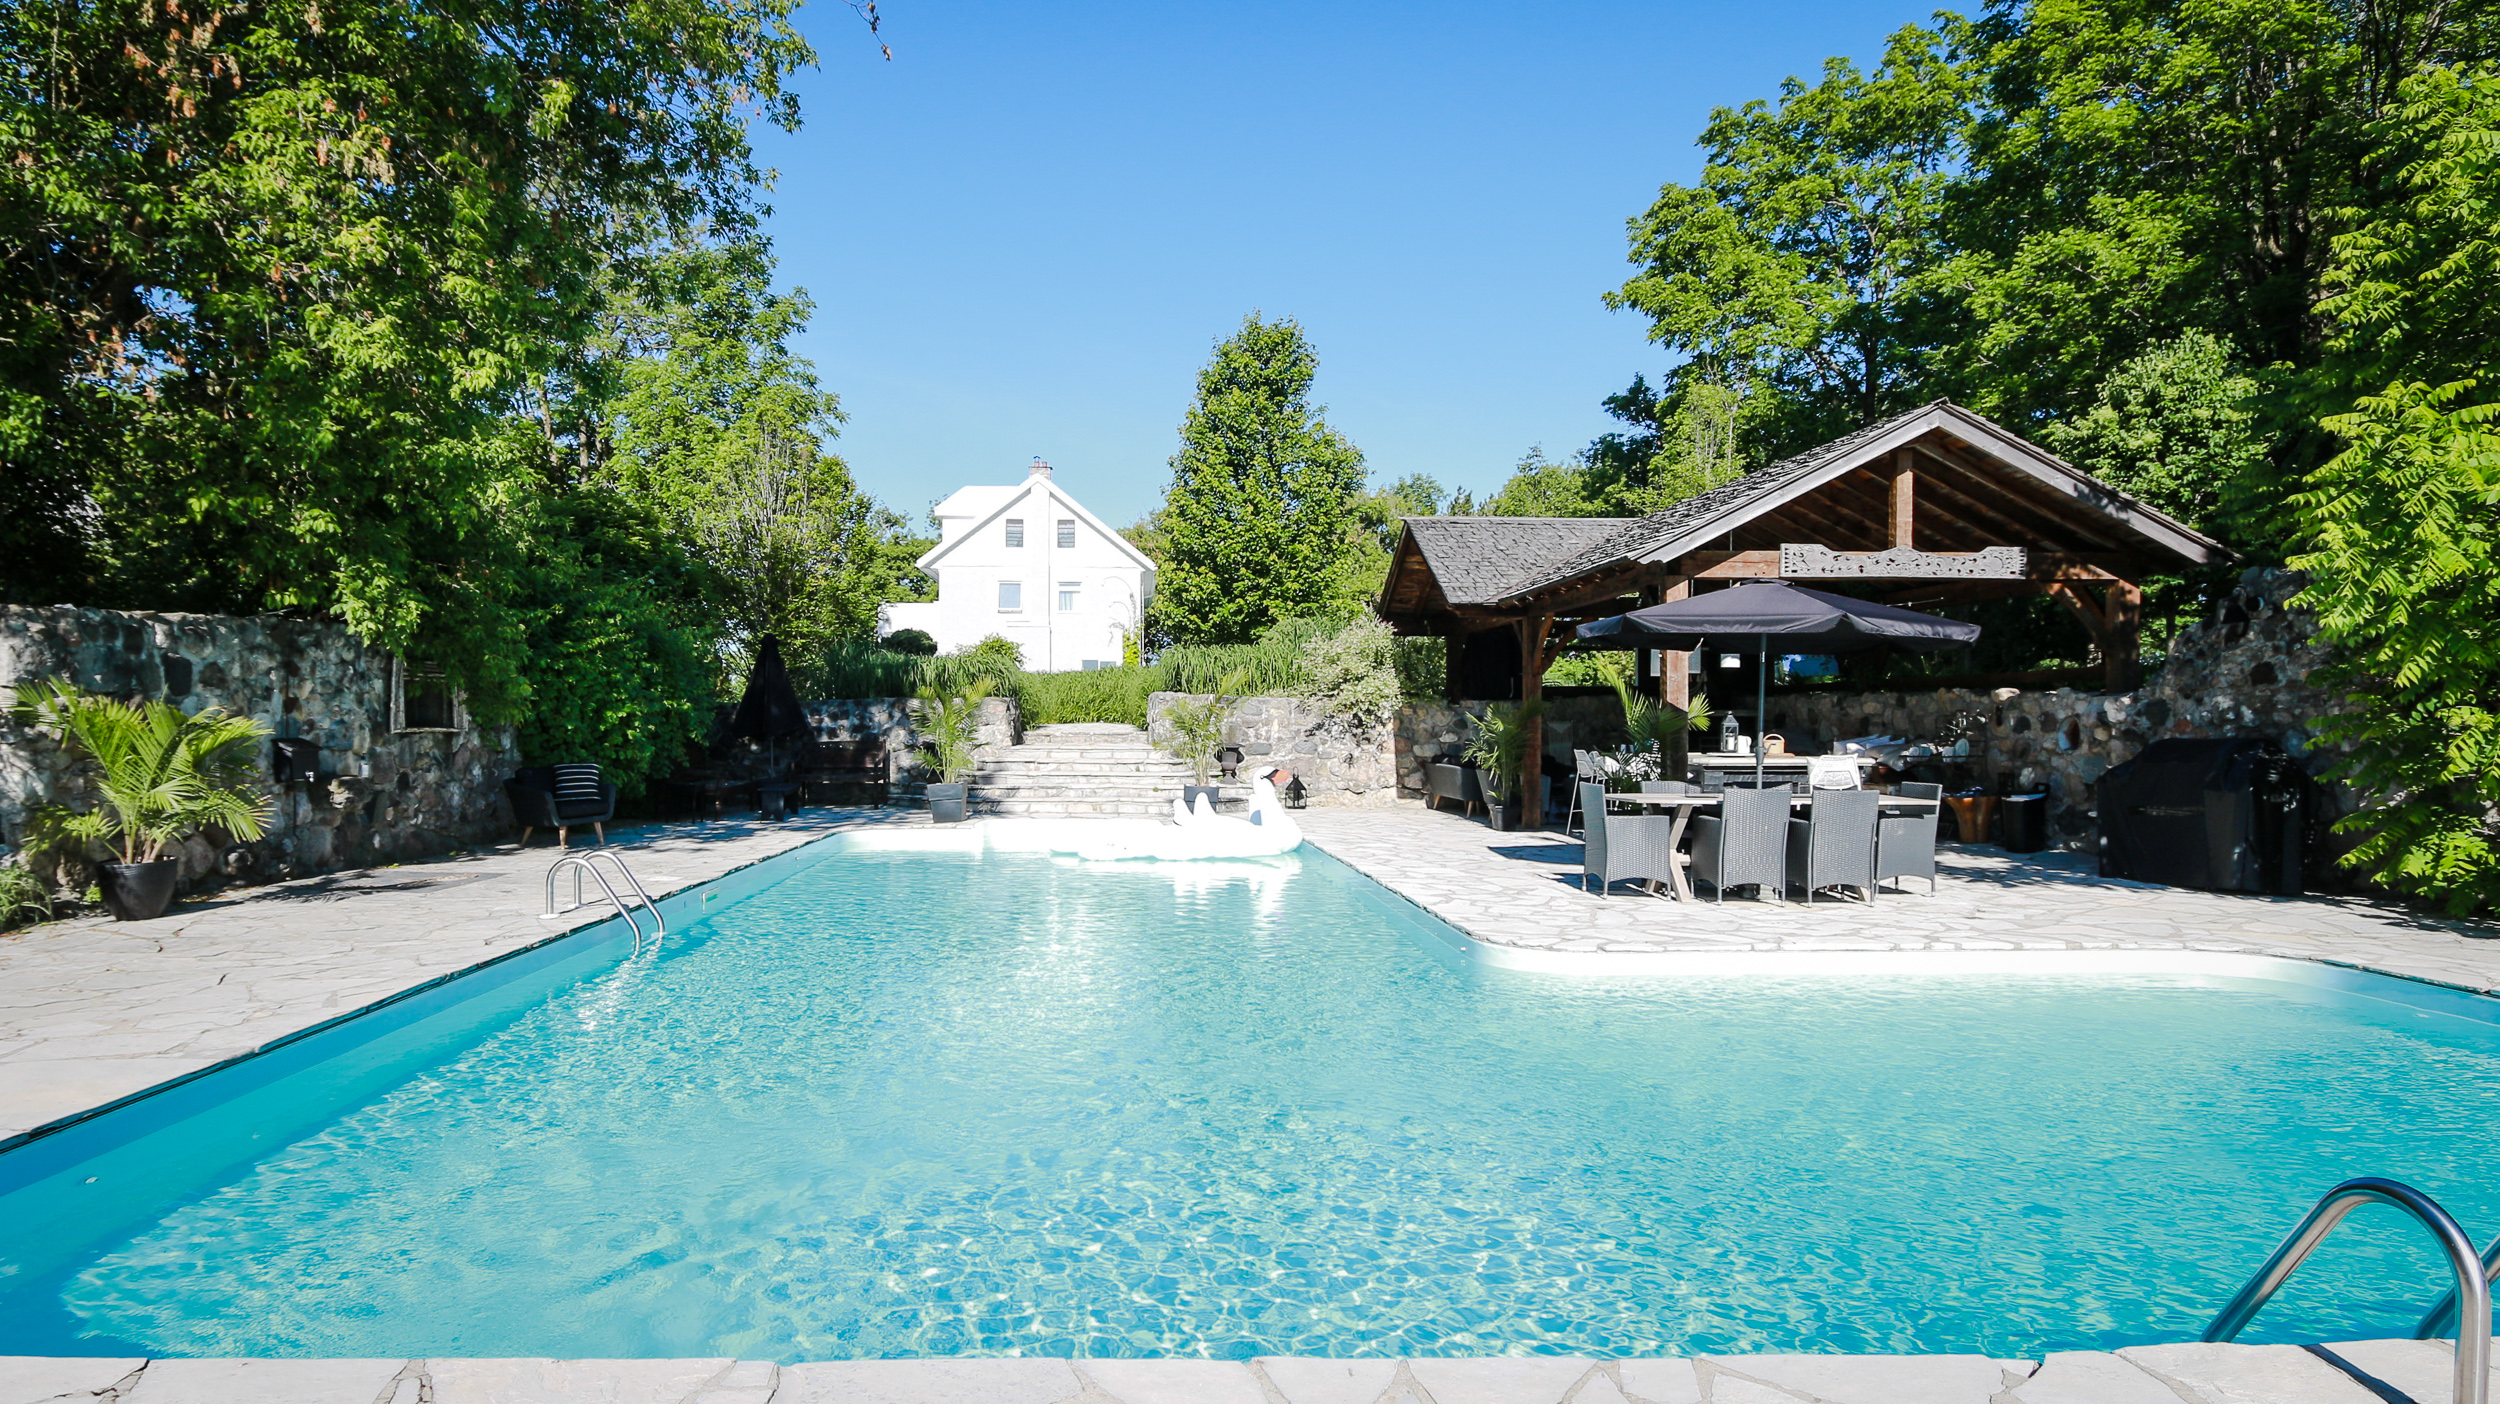 Make your own meals, have a BBQ, and swim at the treehouse + cabin retreat pool! It's a perfect setting for getaways, photo-shoots, bachelorette parties, retreats and small events.